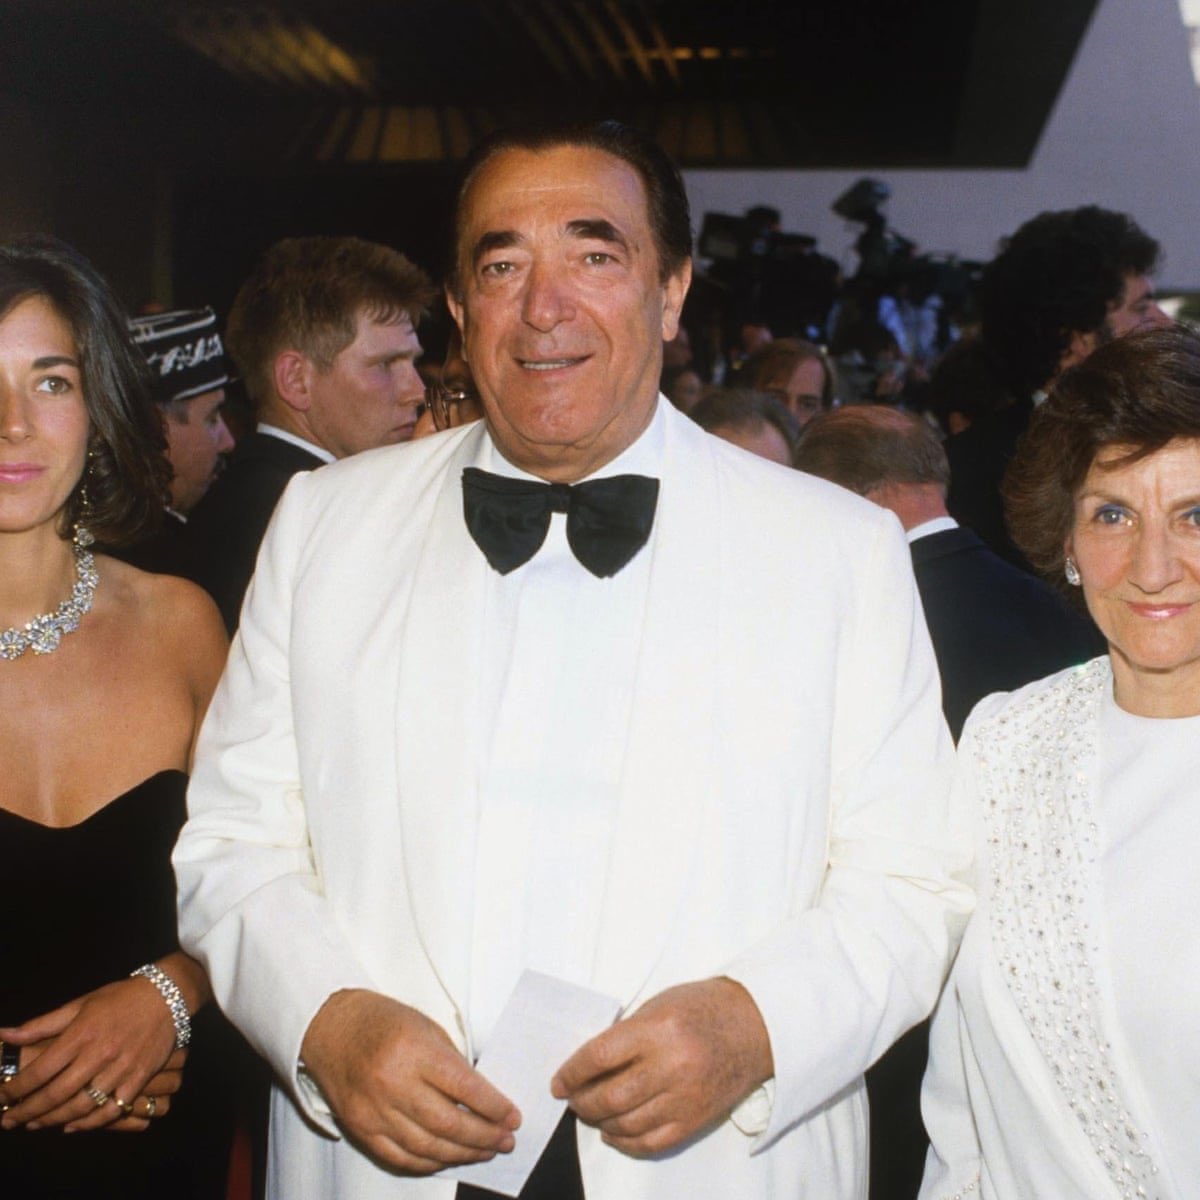 Ghislaine Maxwell father, Robert Maxwell, was a Mossad agent for Israel. He was in control of large publishing networks in Britain. He would also blackmail elites for highly sensitive to info.